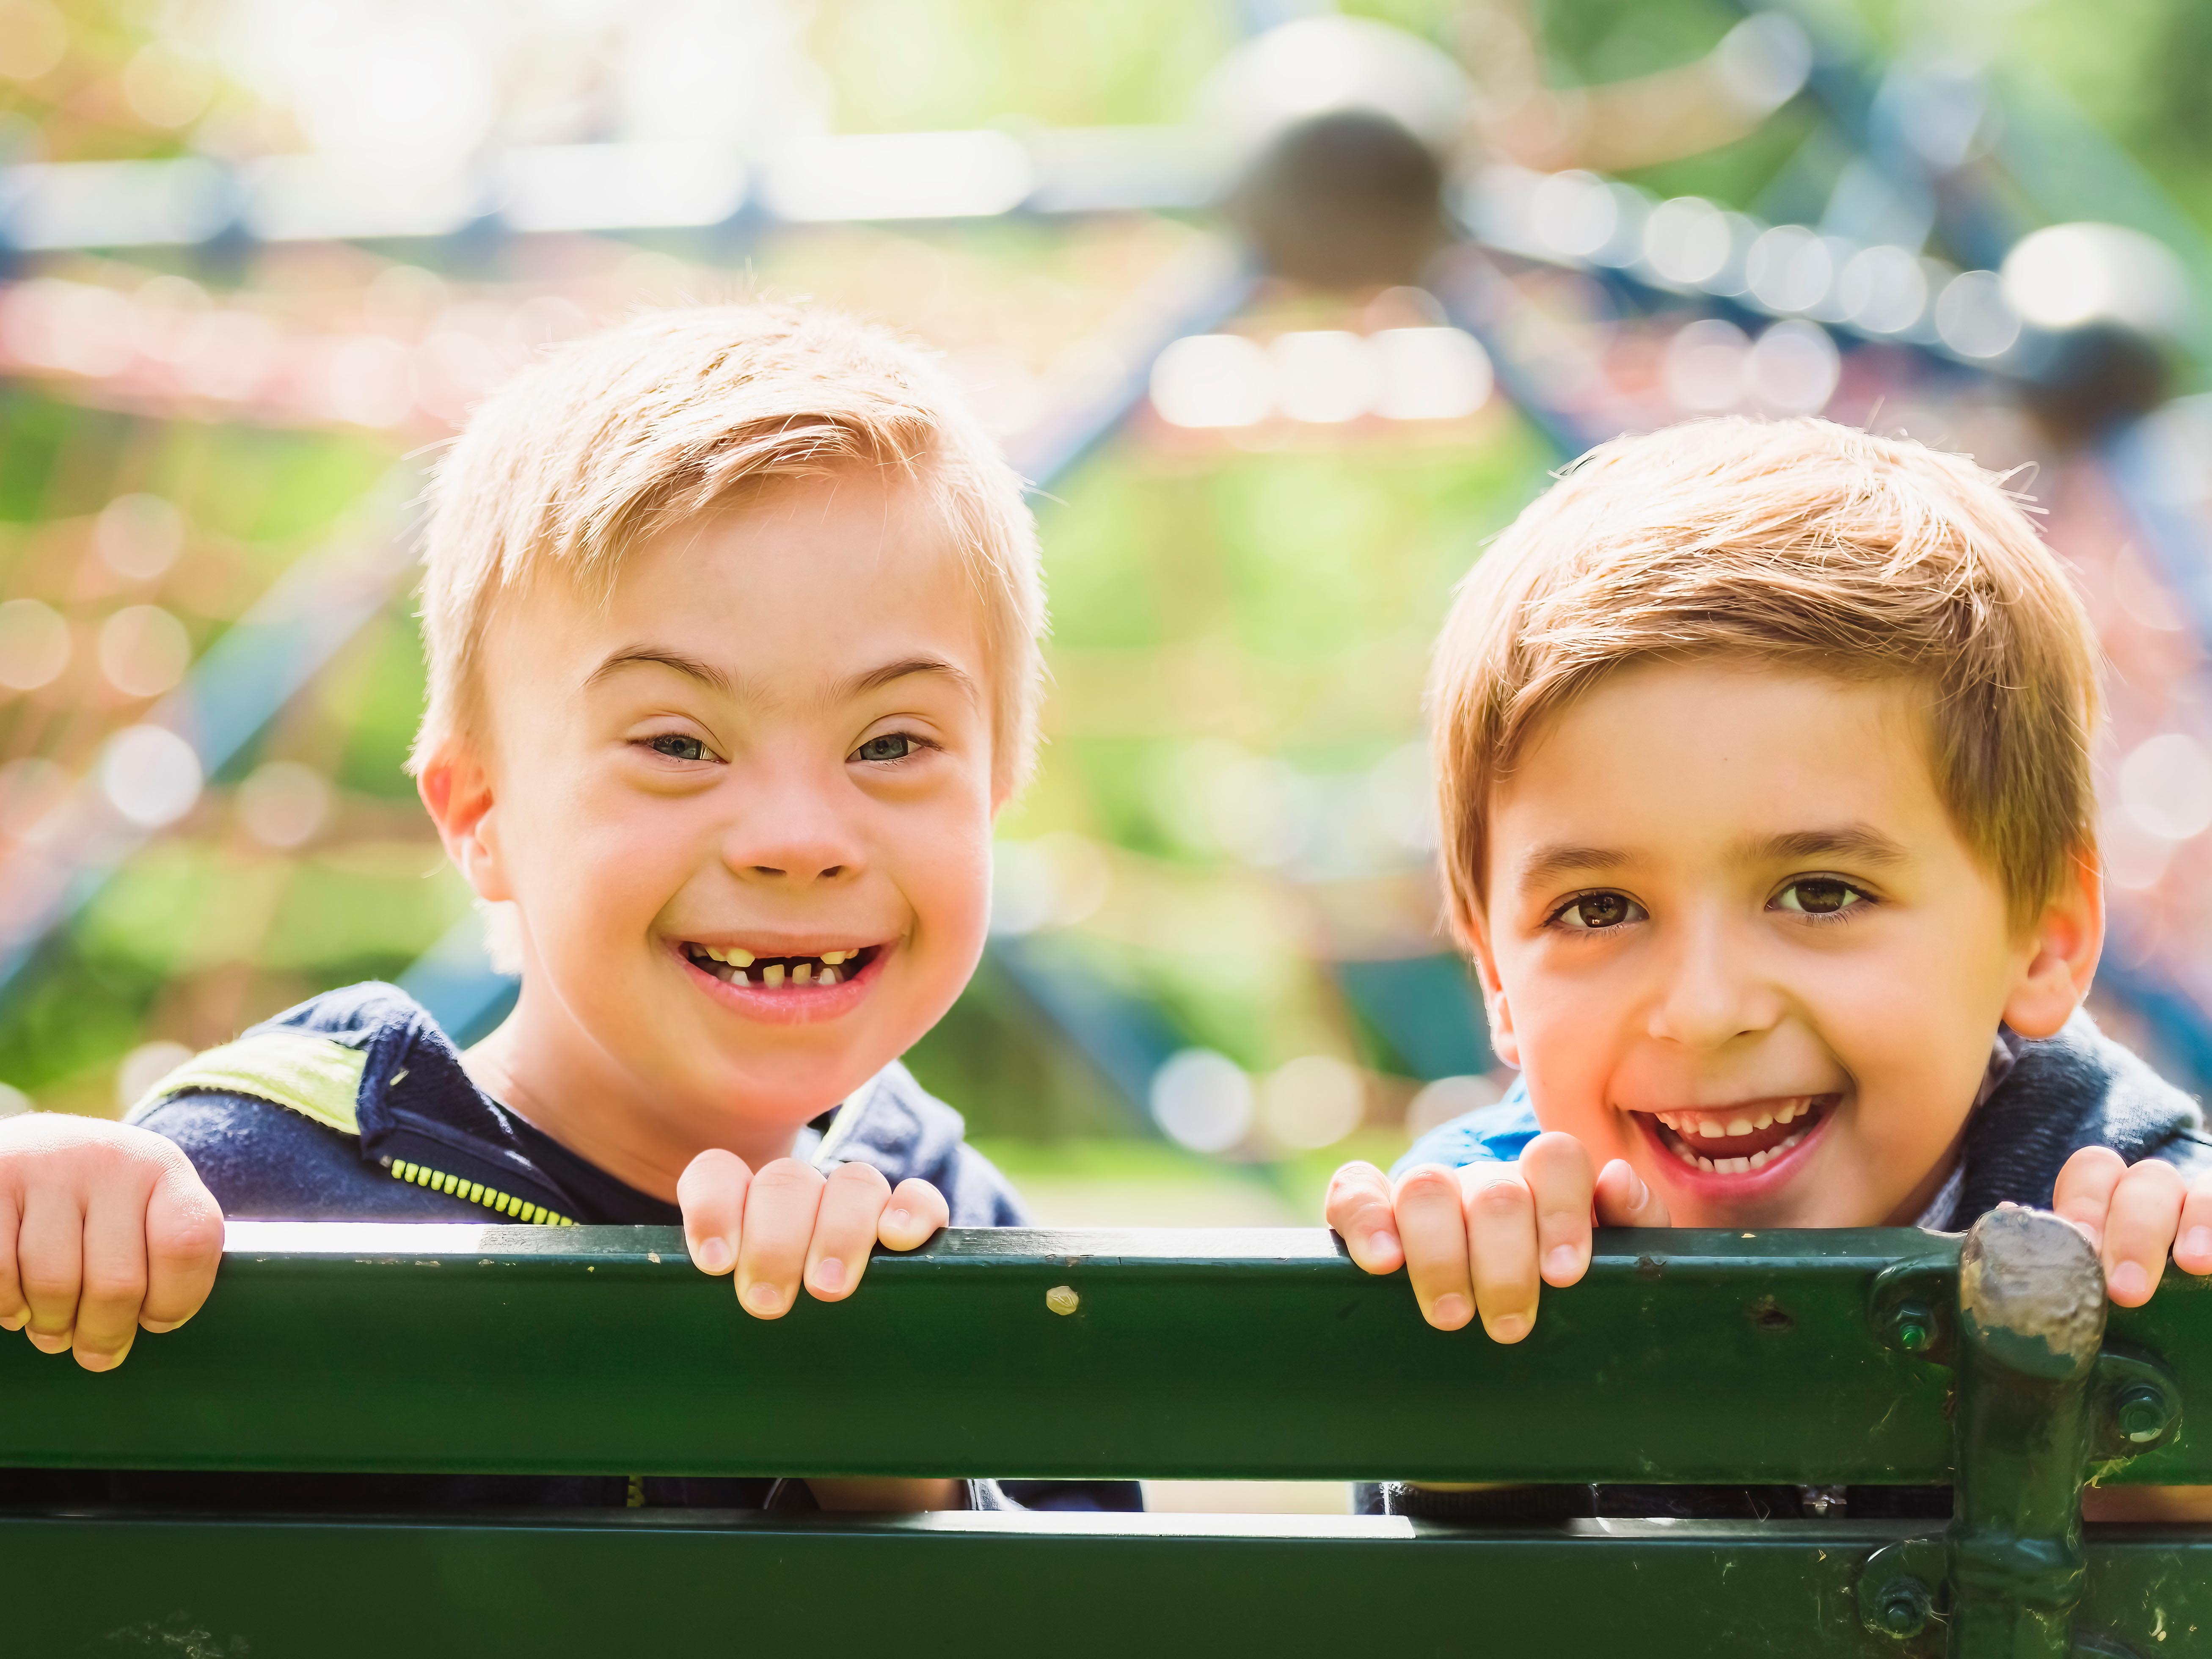 Portrait of a little boy with down syndrome sit on a bench with his brother